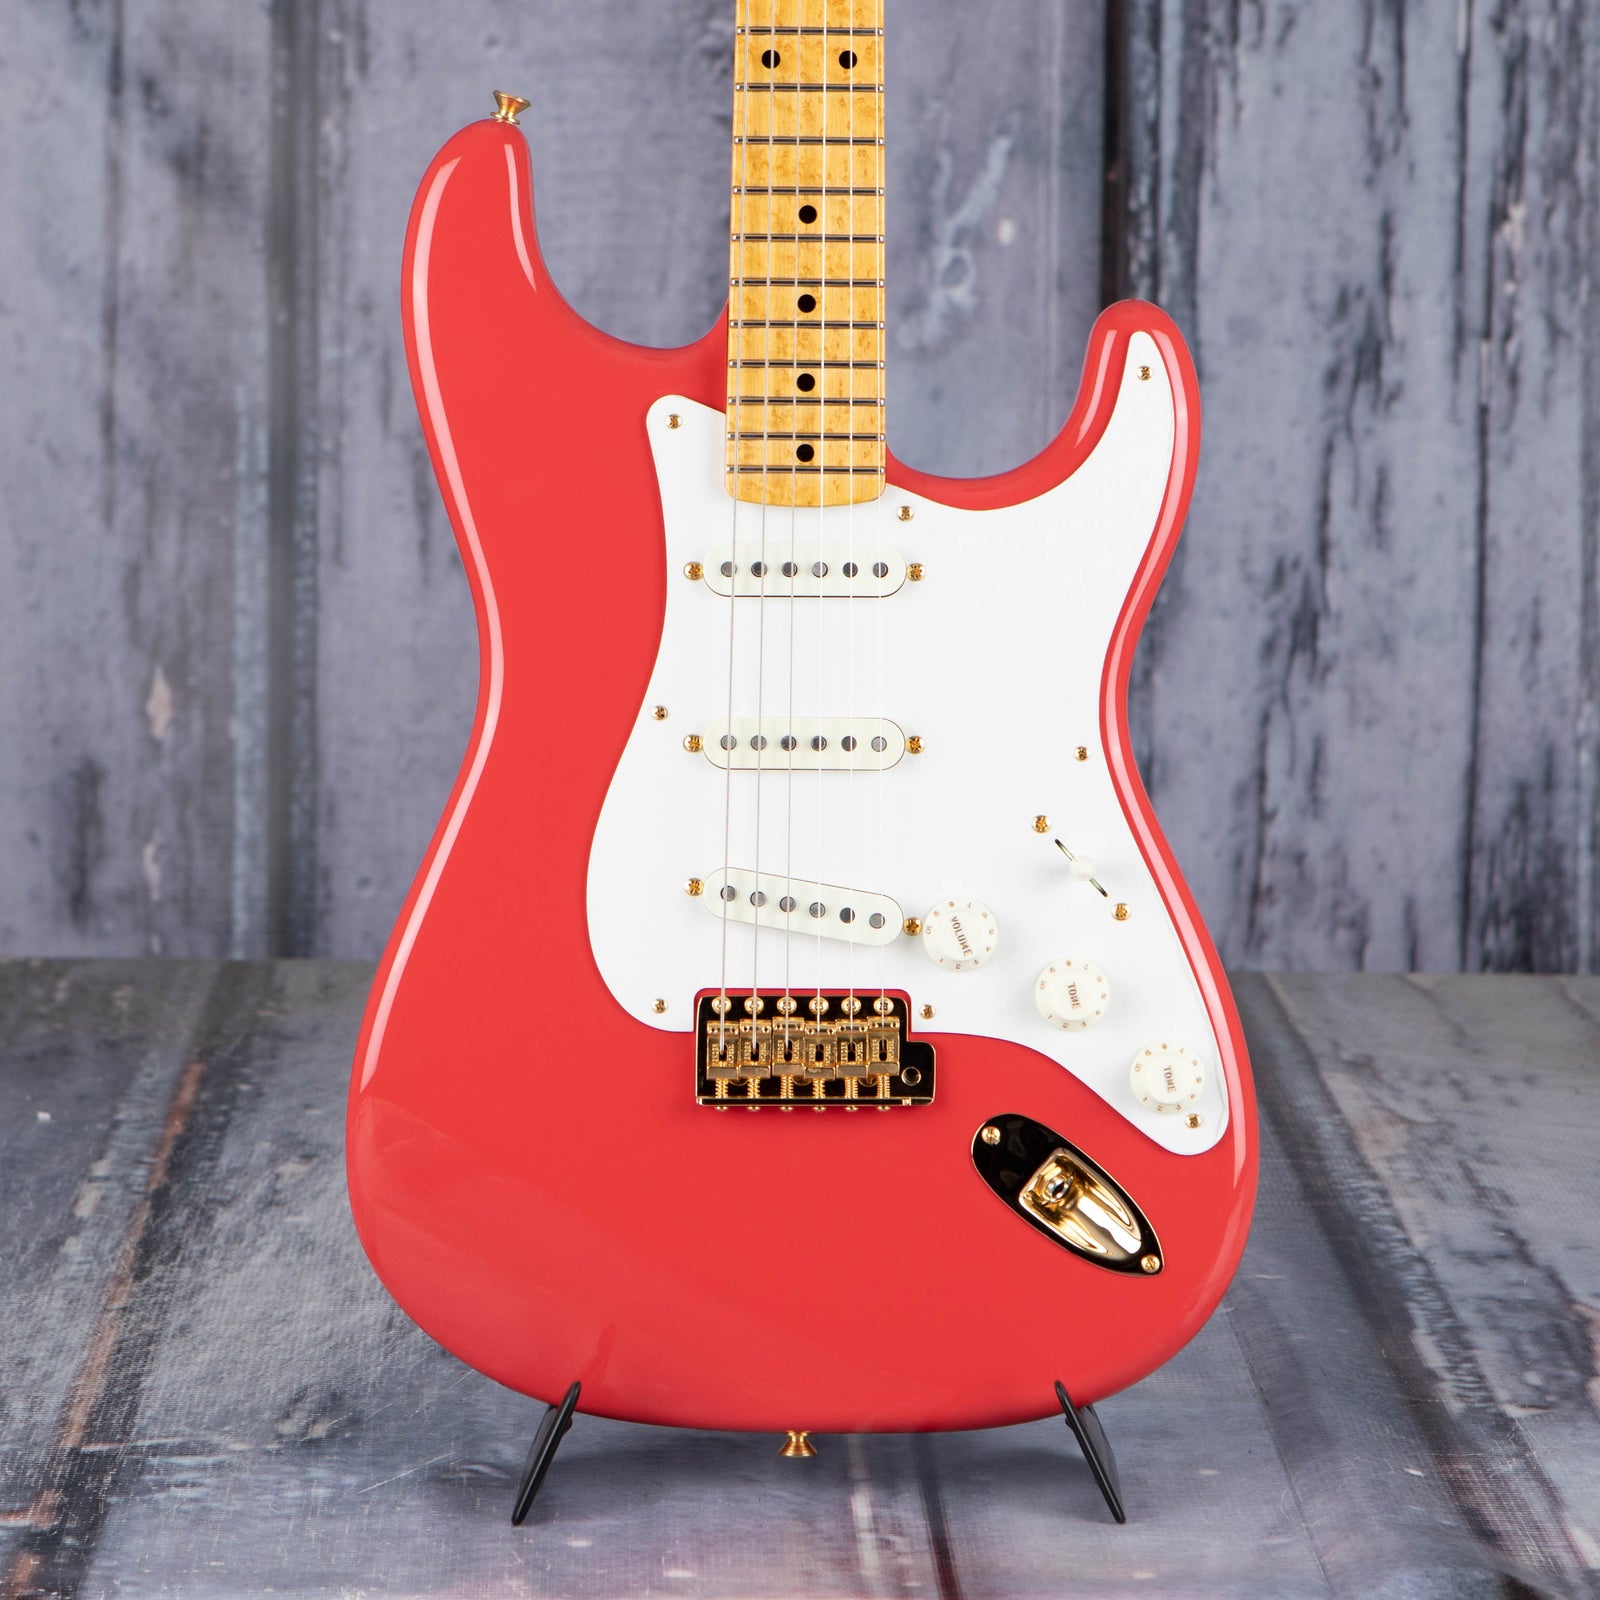 Fender Custom Shop Limited Edition '59 Stratocaster NOS Gold Hardware, Fiesta Red | For Sale | Replay Guitar Exchange